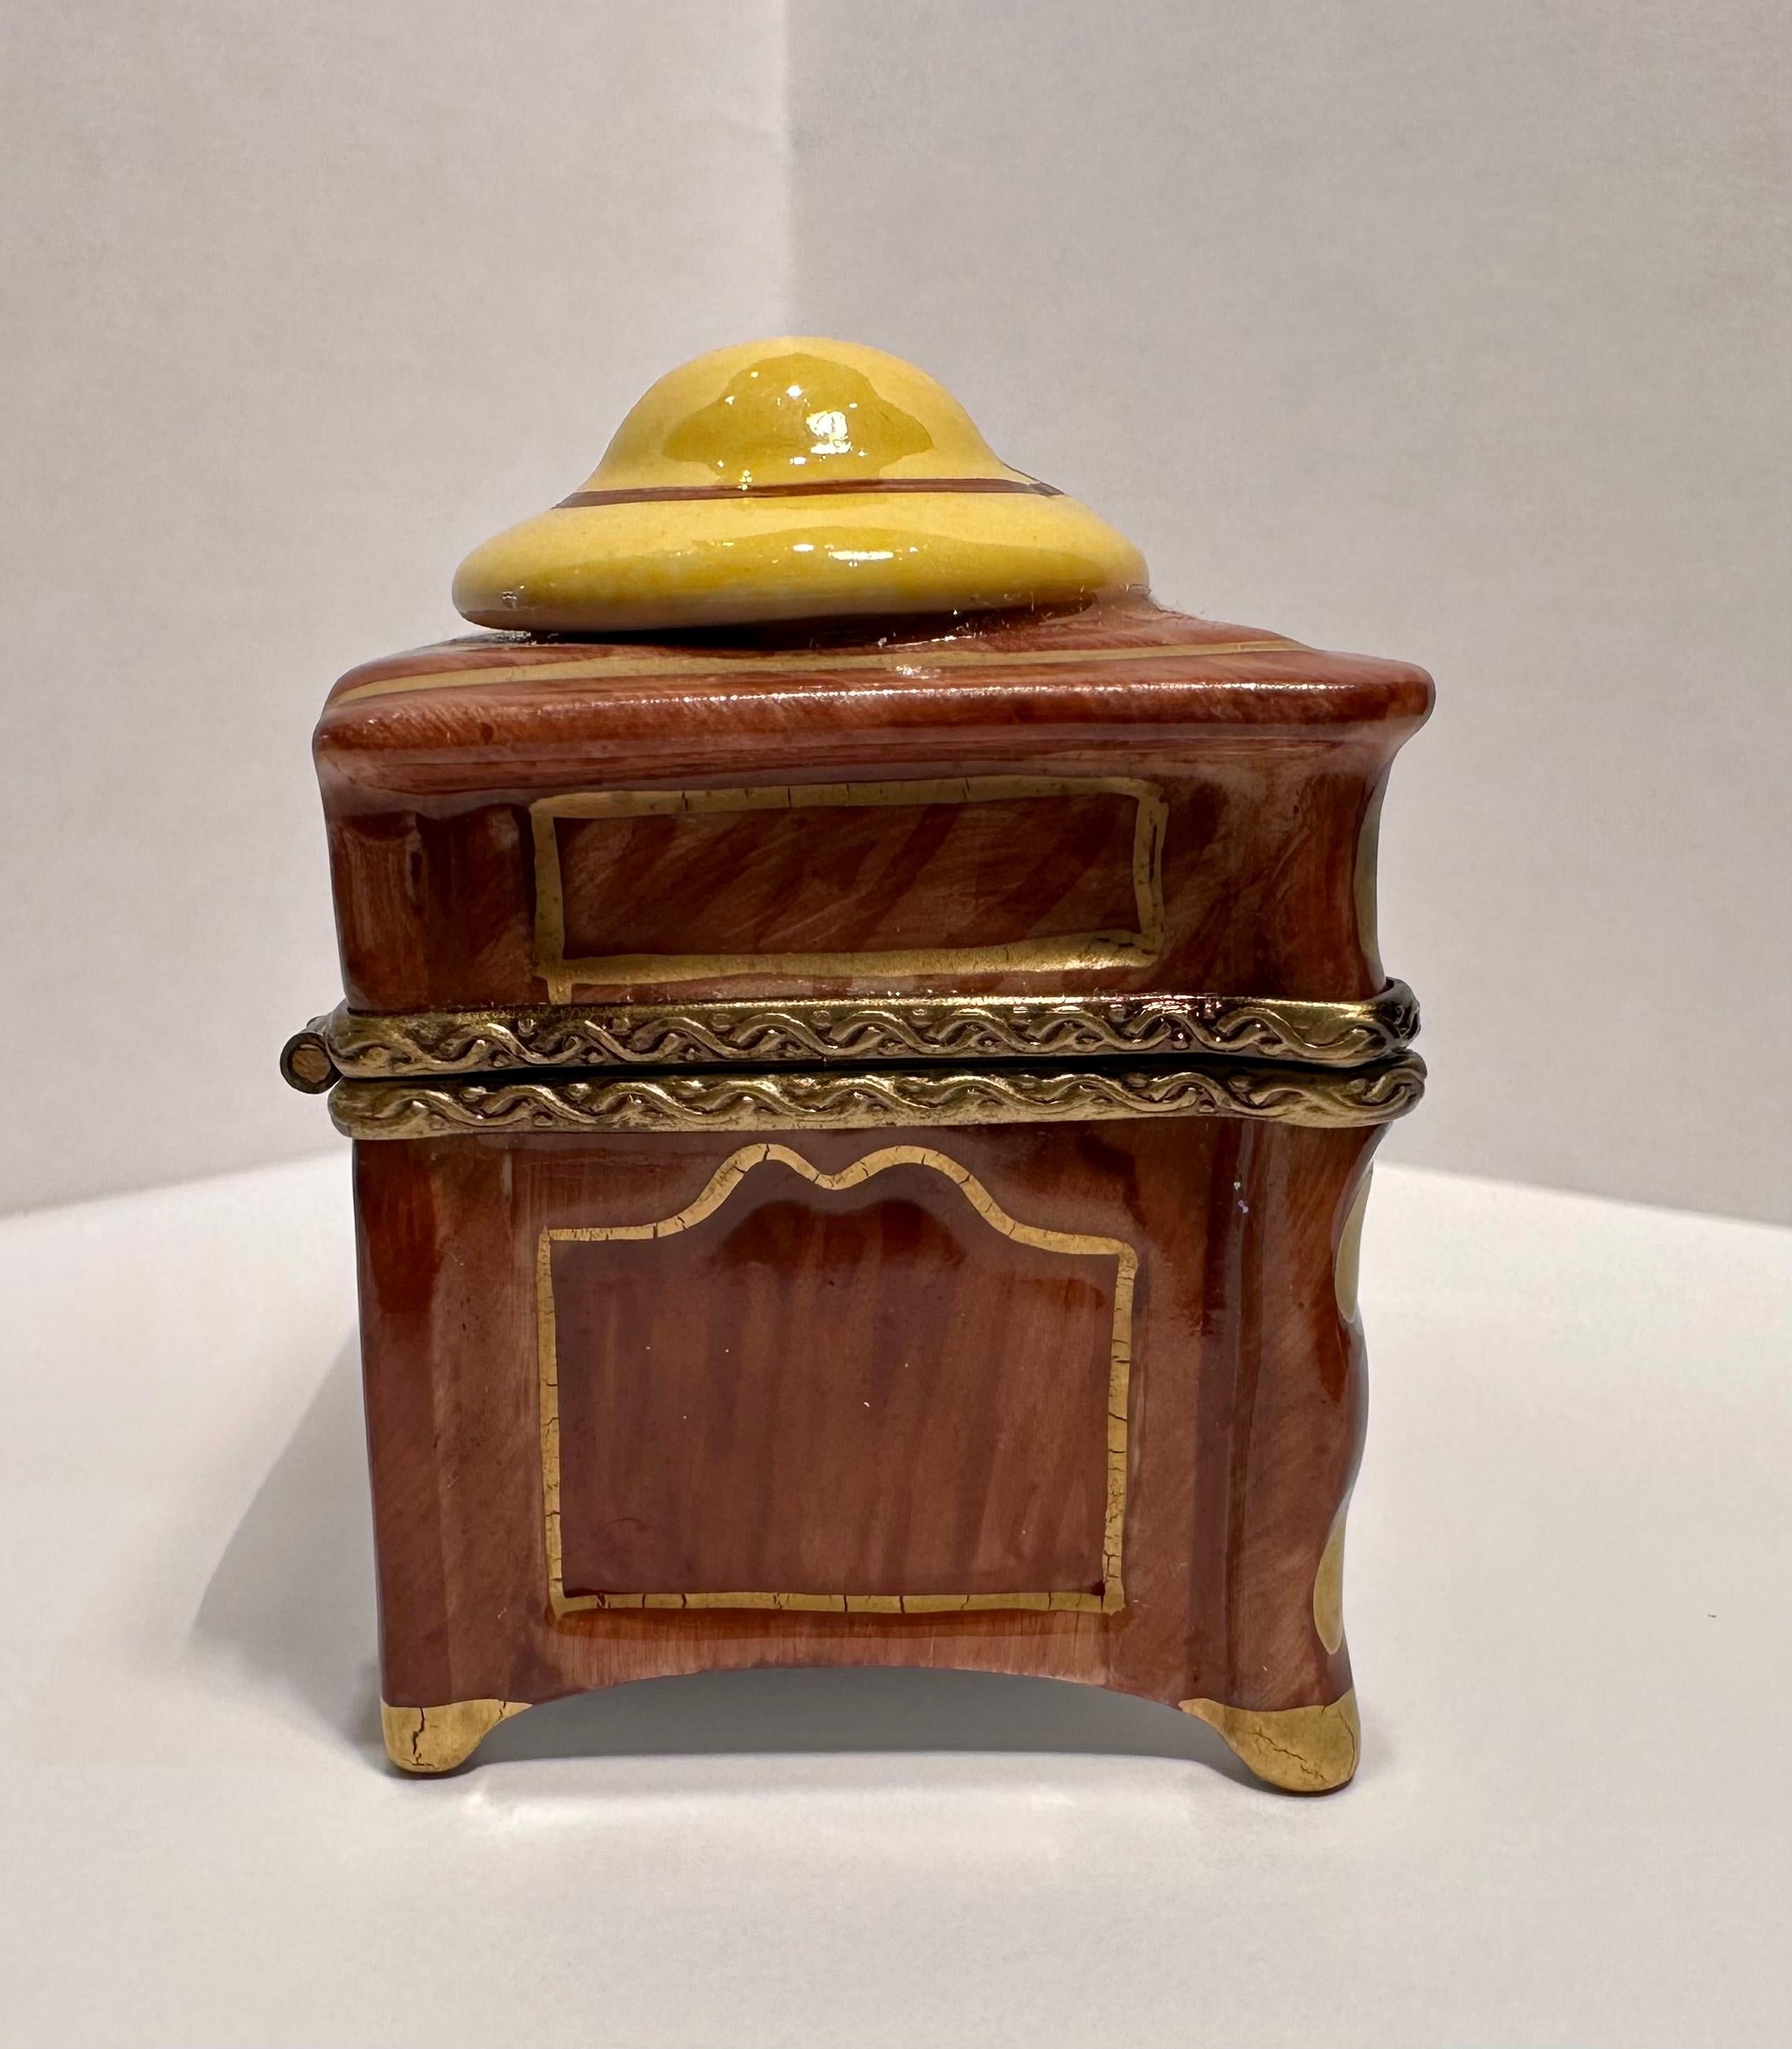 Limoges France Hand Painted Dresser With Hat & Music Book Porcelain Trinket Box In Excellent Condition For Sale In Tustin, CA